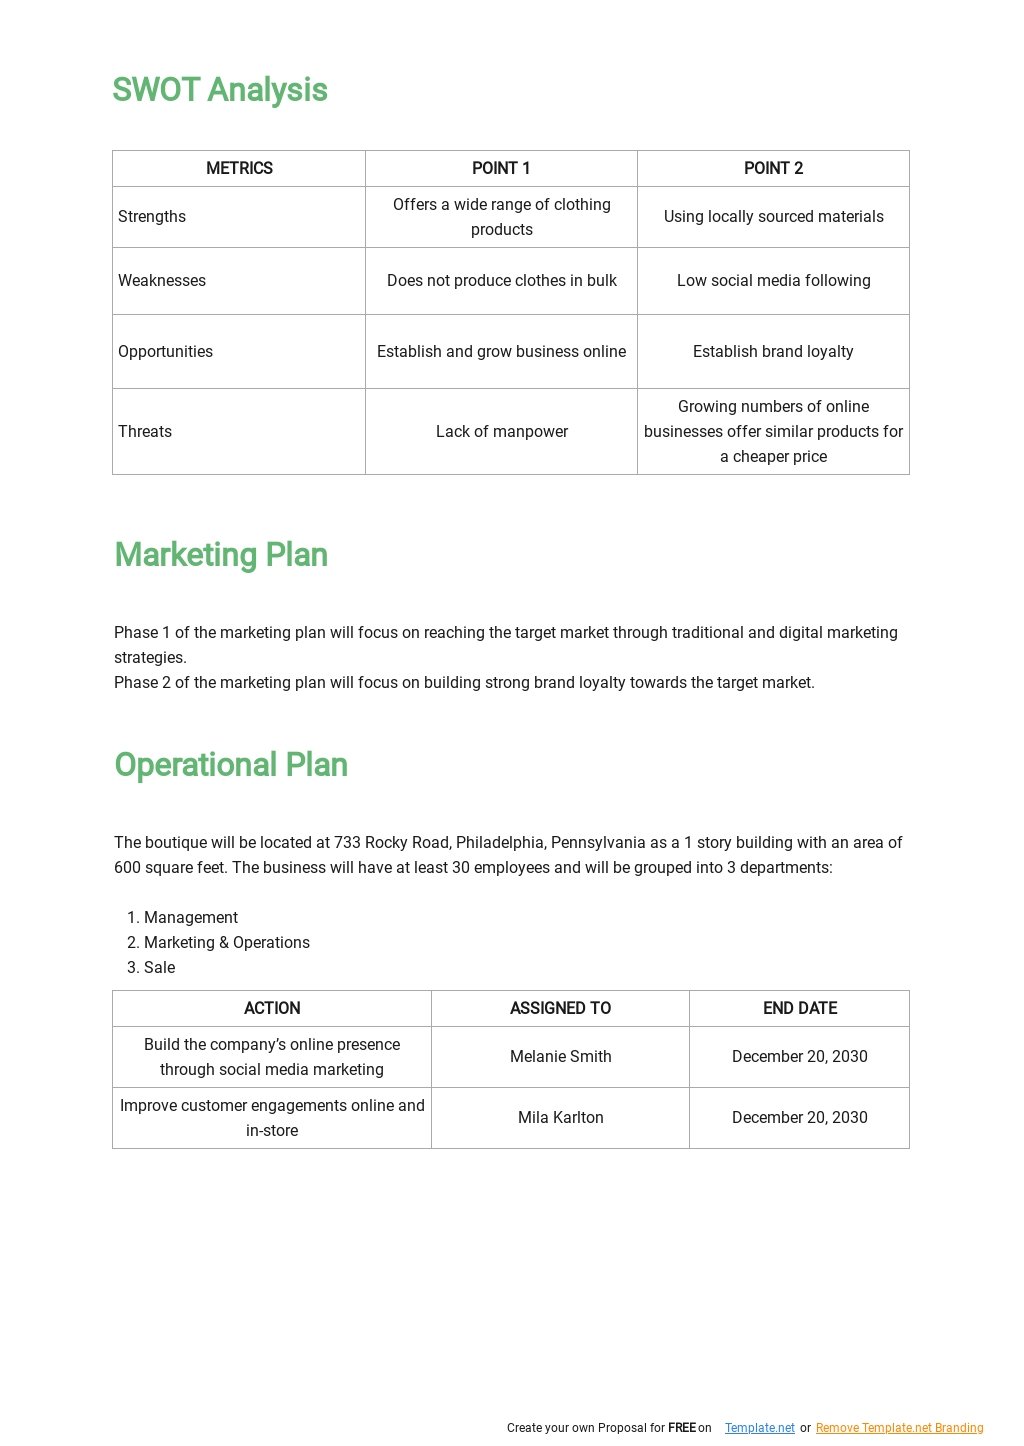 Business Plan Template For Clothing Line